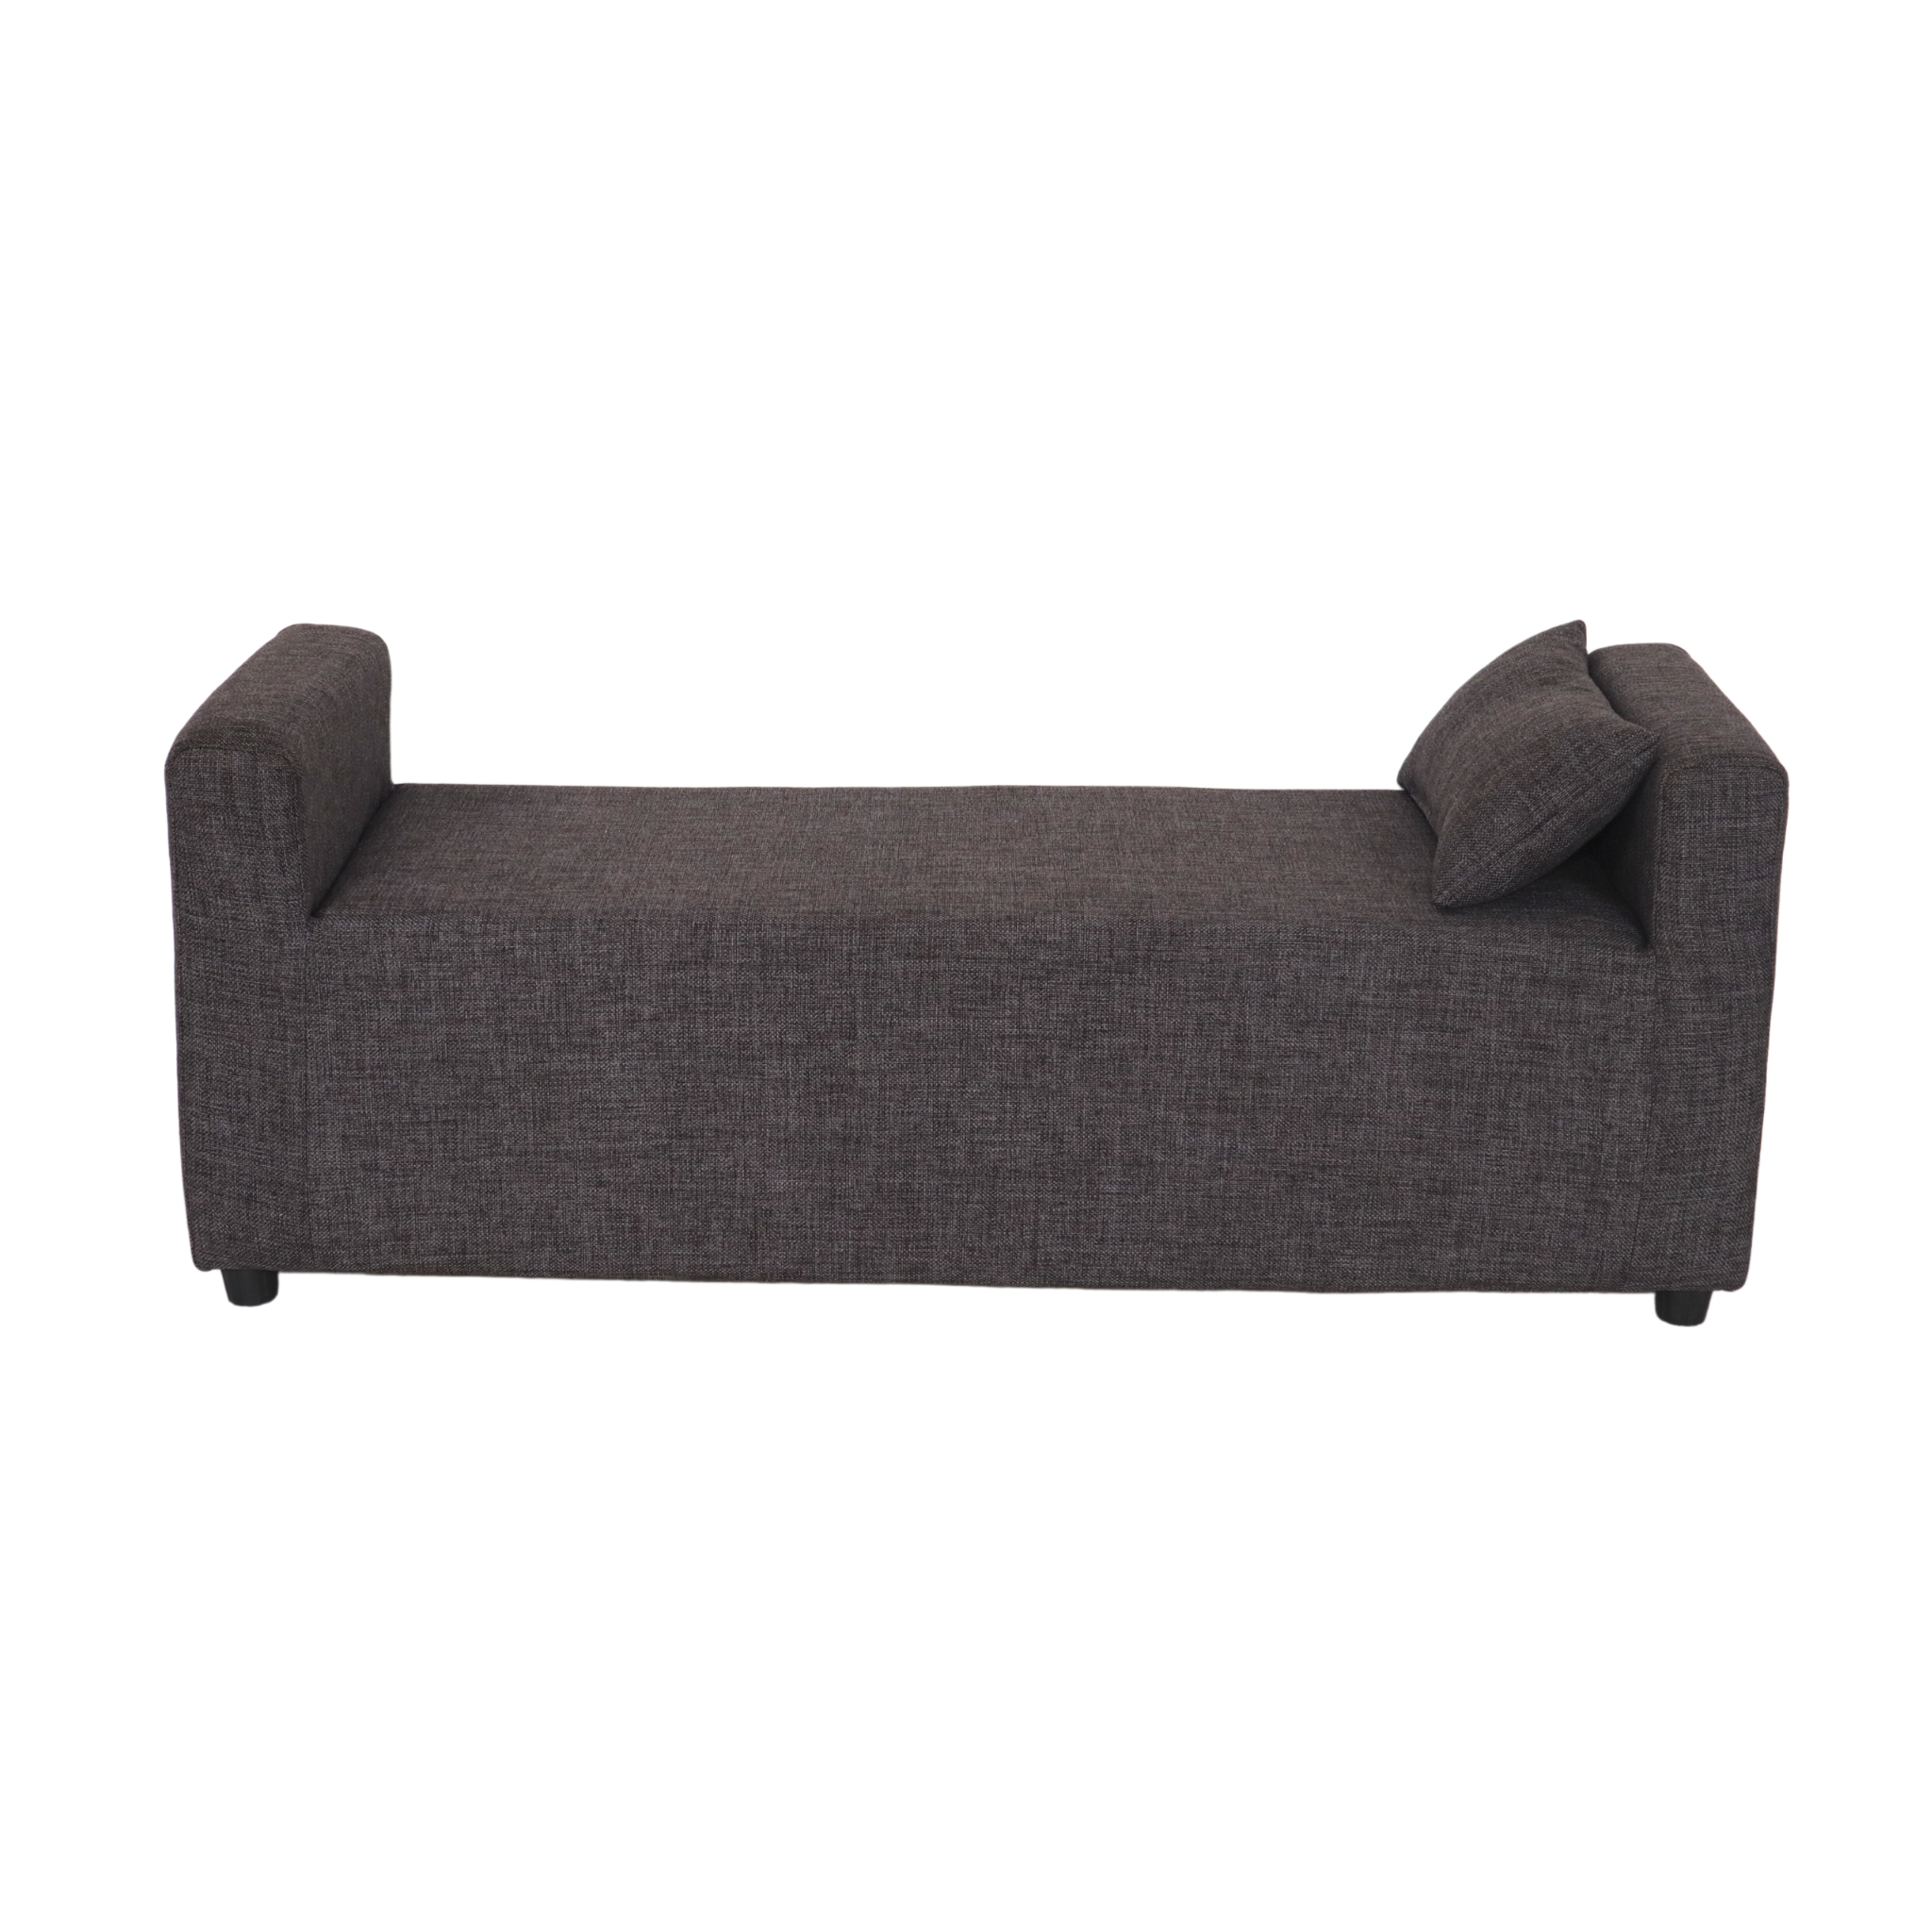 FALCON 3 Seater Bench Fabric Sofa AF Home